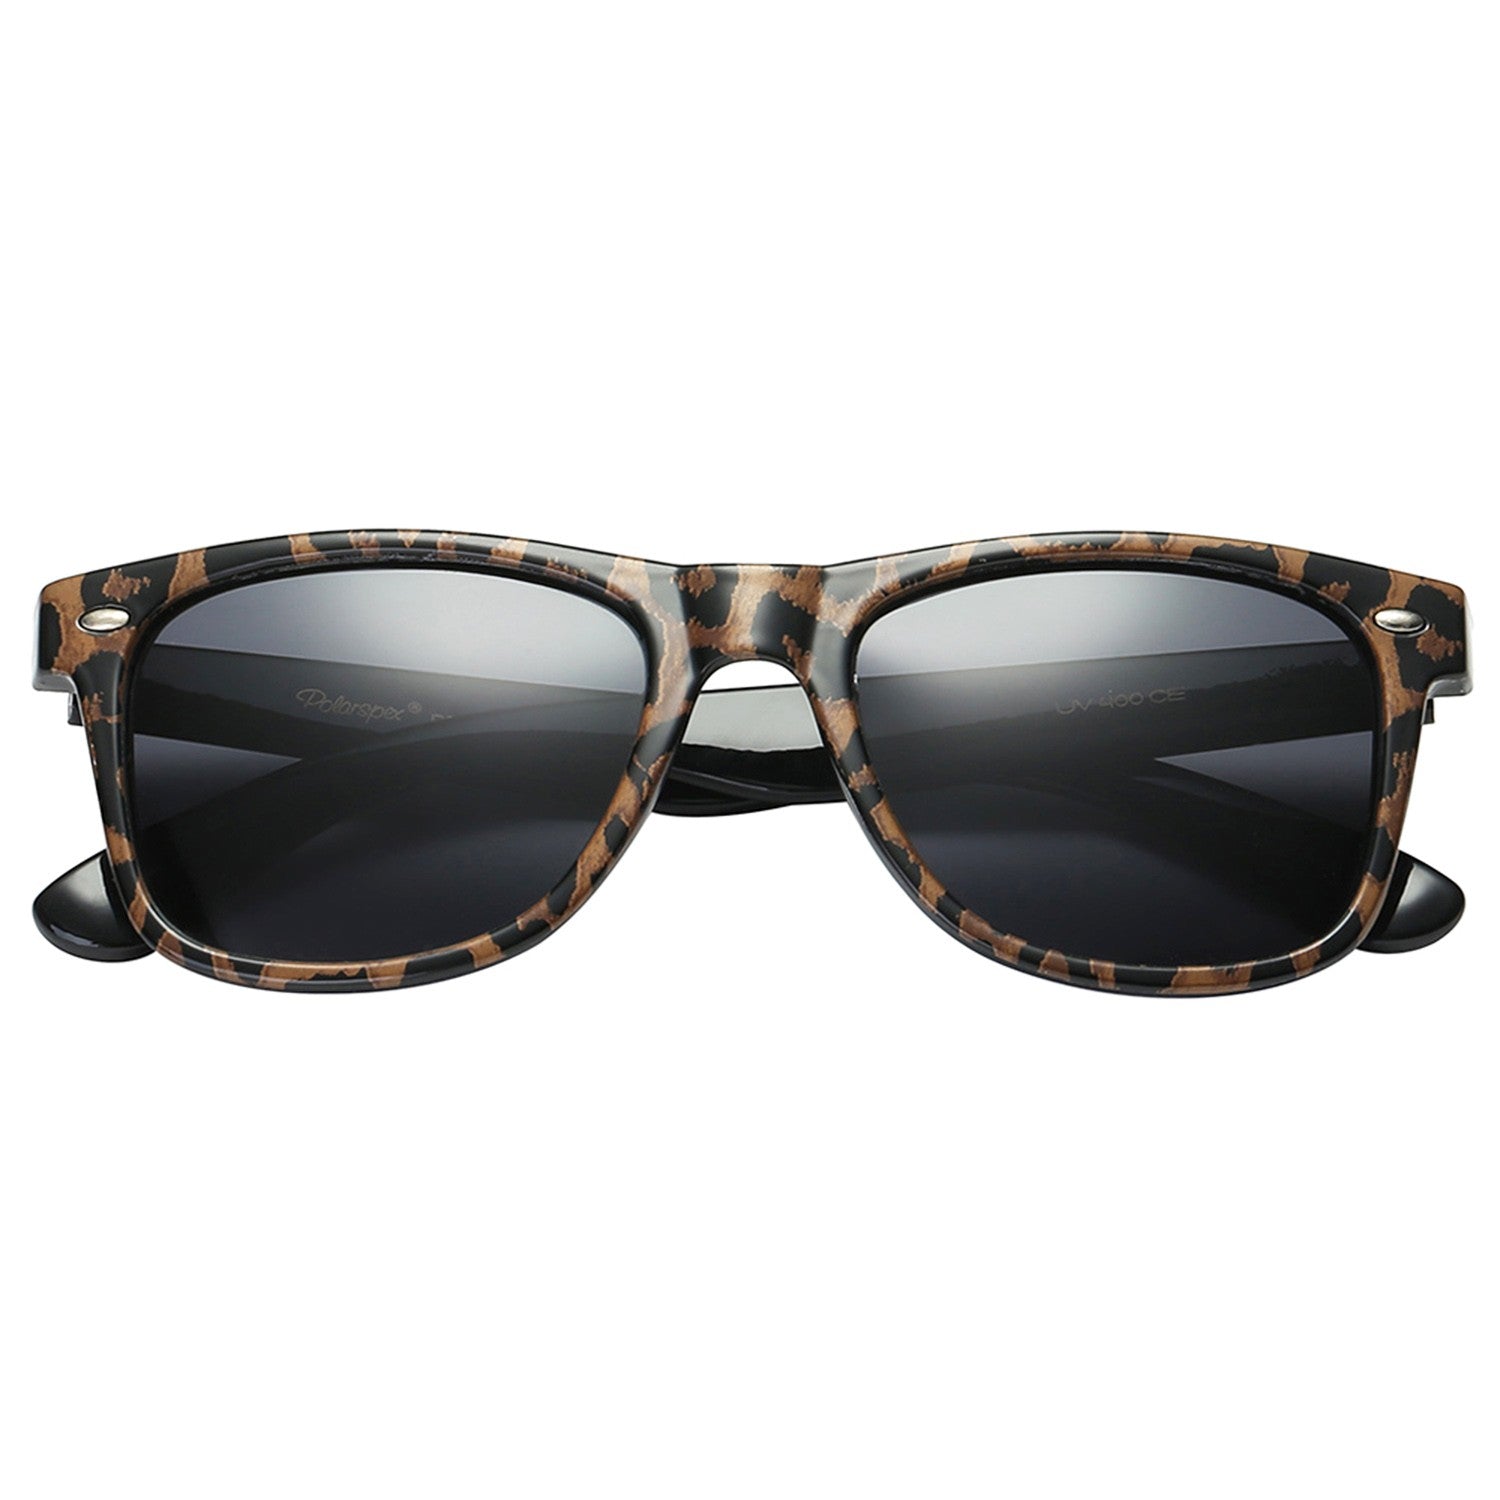 Polarspex Polarized 80's Retro Style Unisex Sunglasses with Leopard Brown Frames and Smoke Lenses